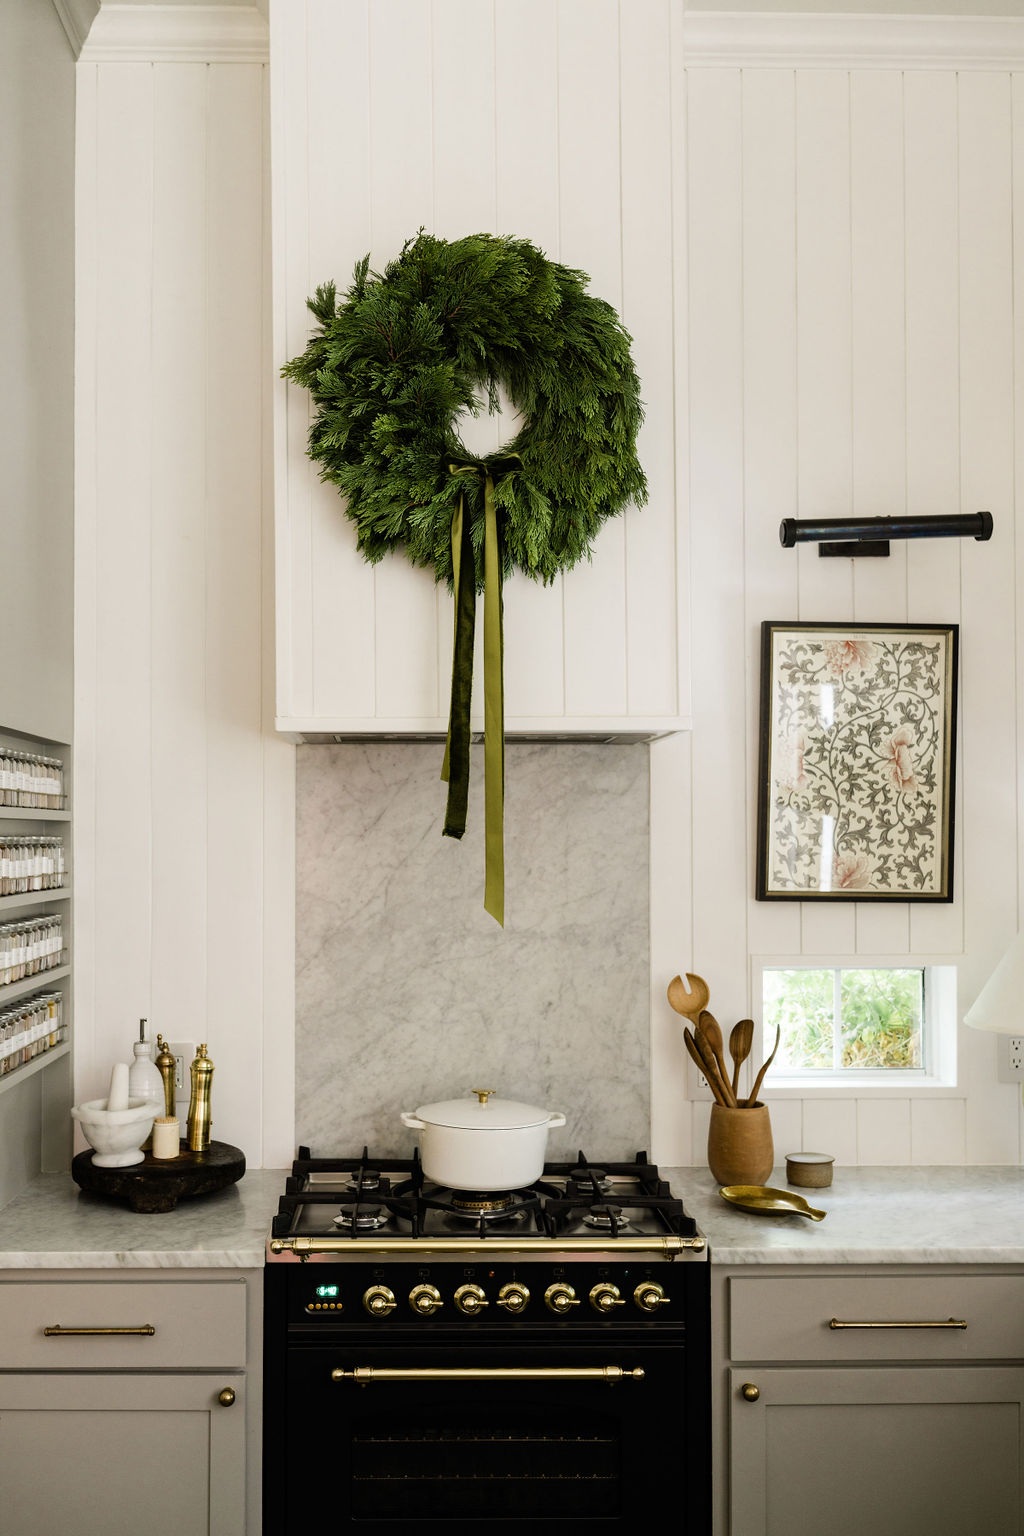 Kitchen holiday decorating with fresh cypress wreath